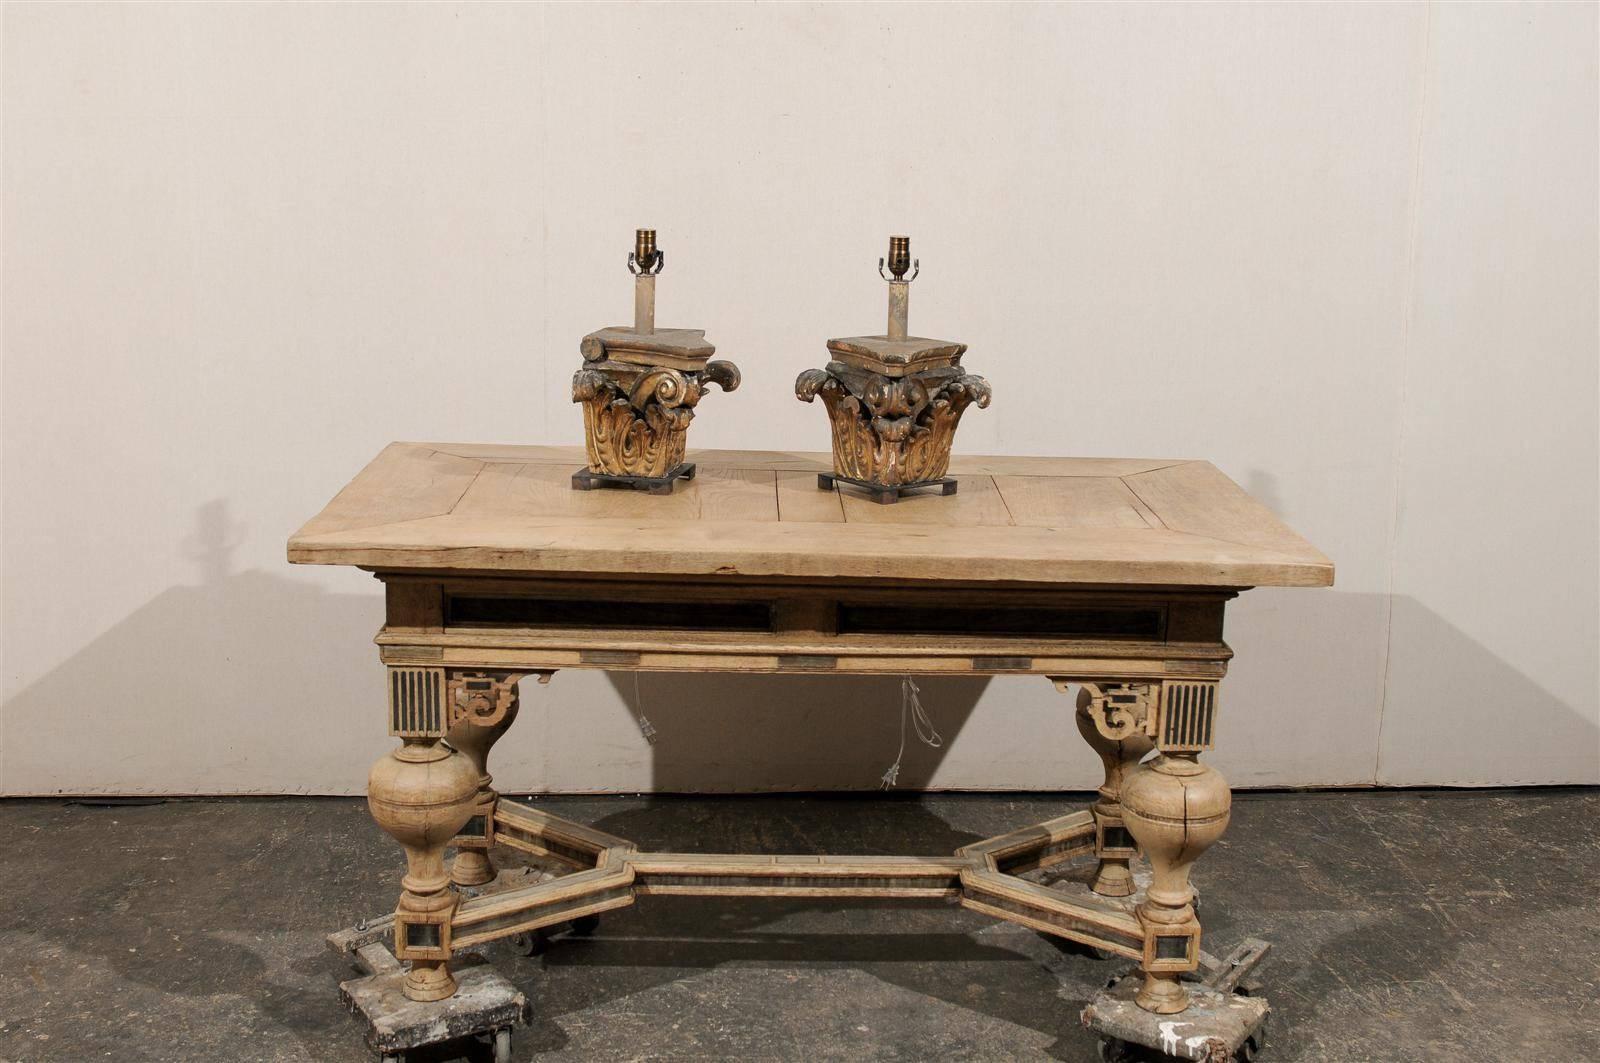 A pair of 19th century Italian wooden Corinthian capital fragments masterfully made into table lamps on modern iron bases. These elegant Italian old column fragments feature leaf motifs towards the base of each lamp that repeat the swirling scroll